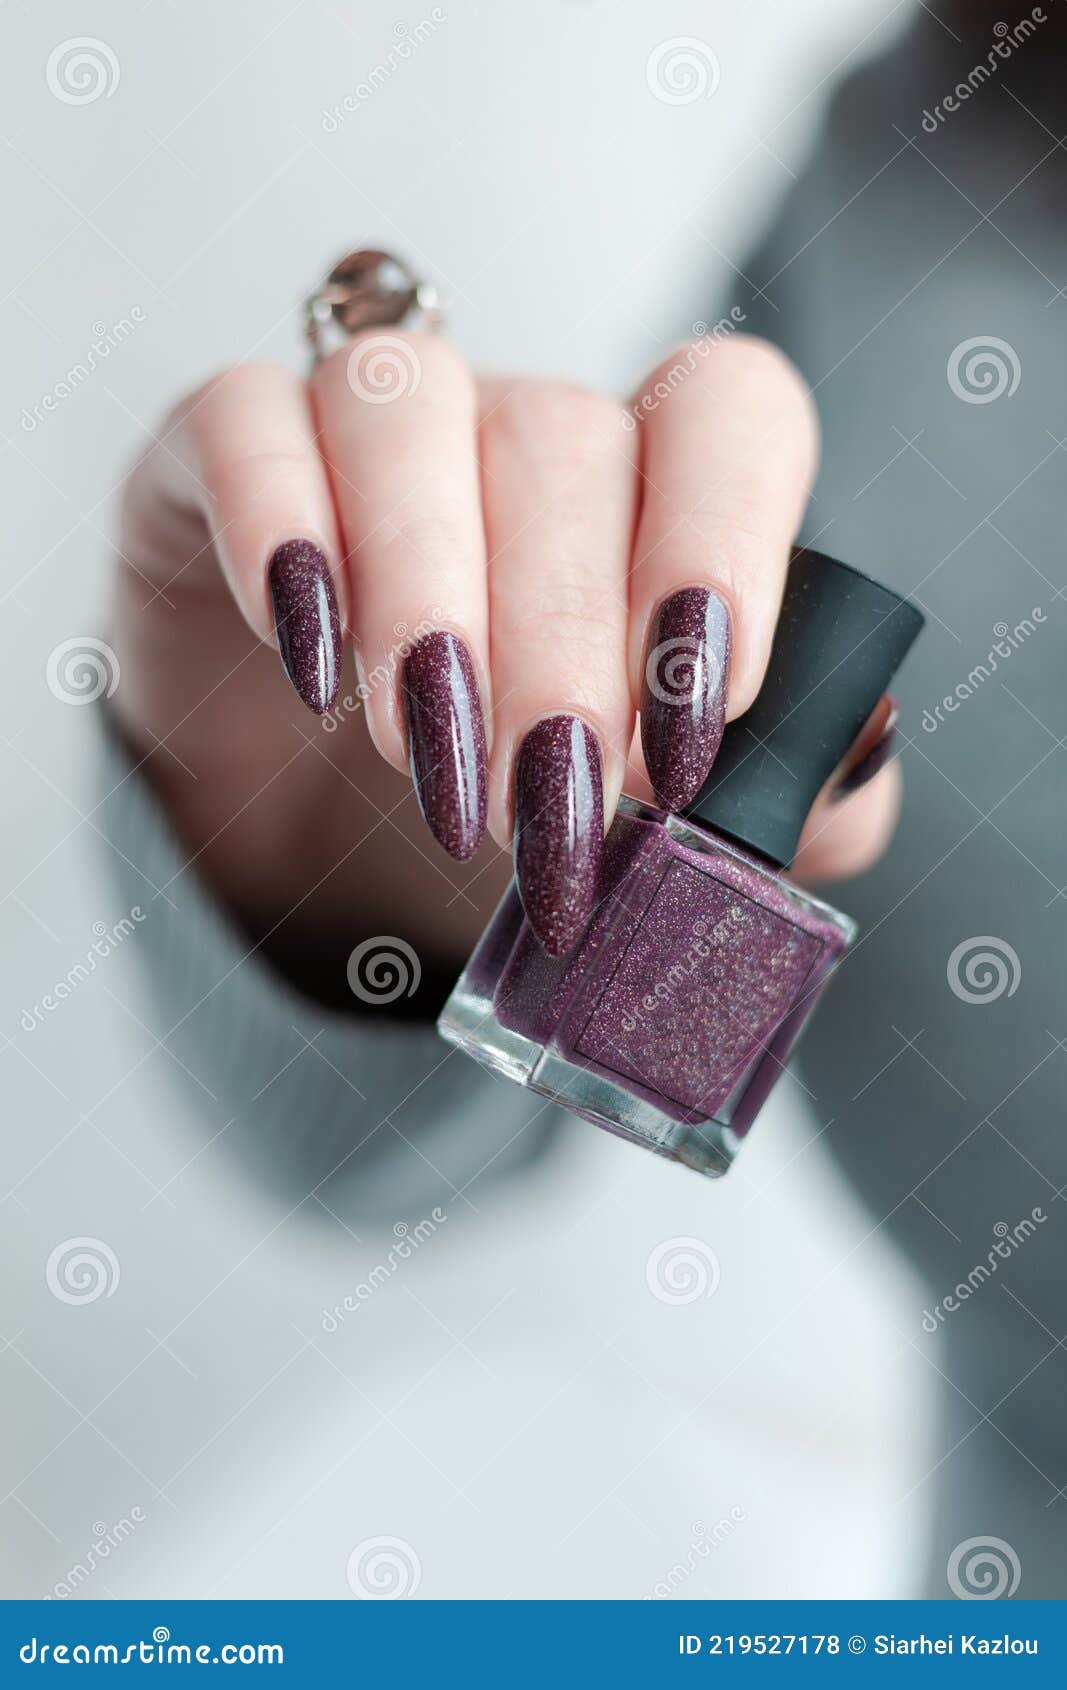 24 Hand Painted Gel False Nails Dark Red - Coffin, Stiletto, Square, Oval |  eBay